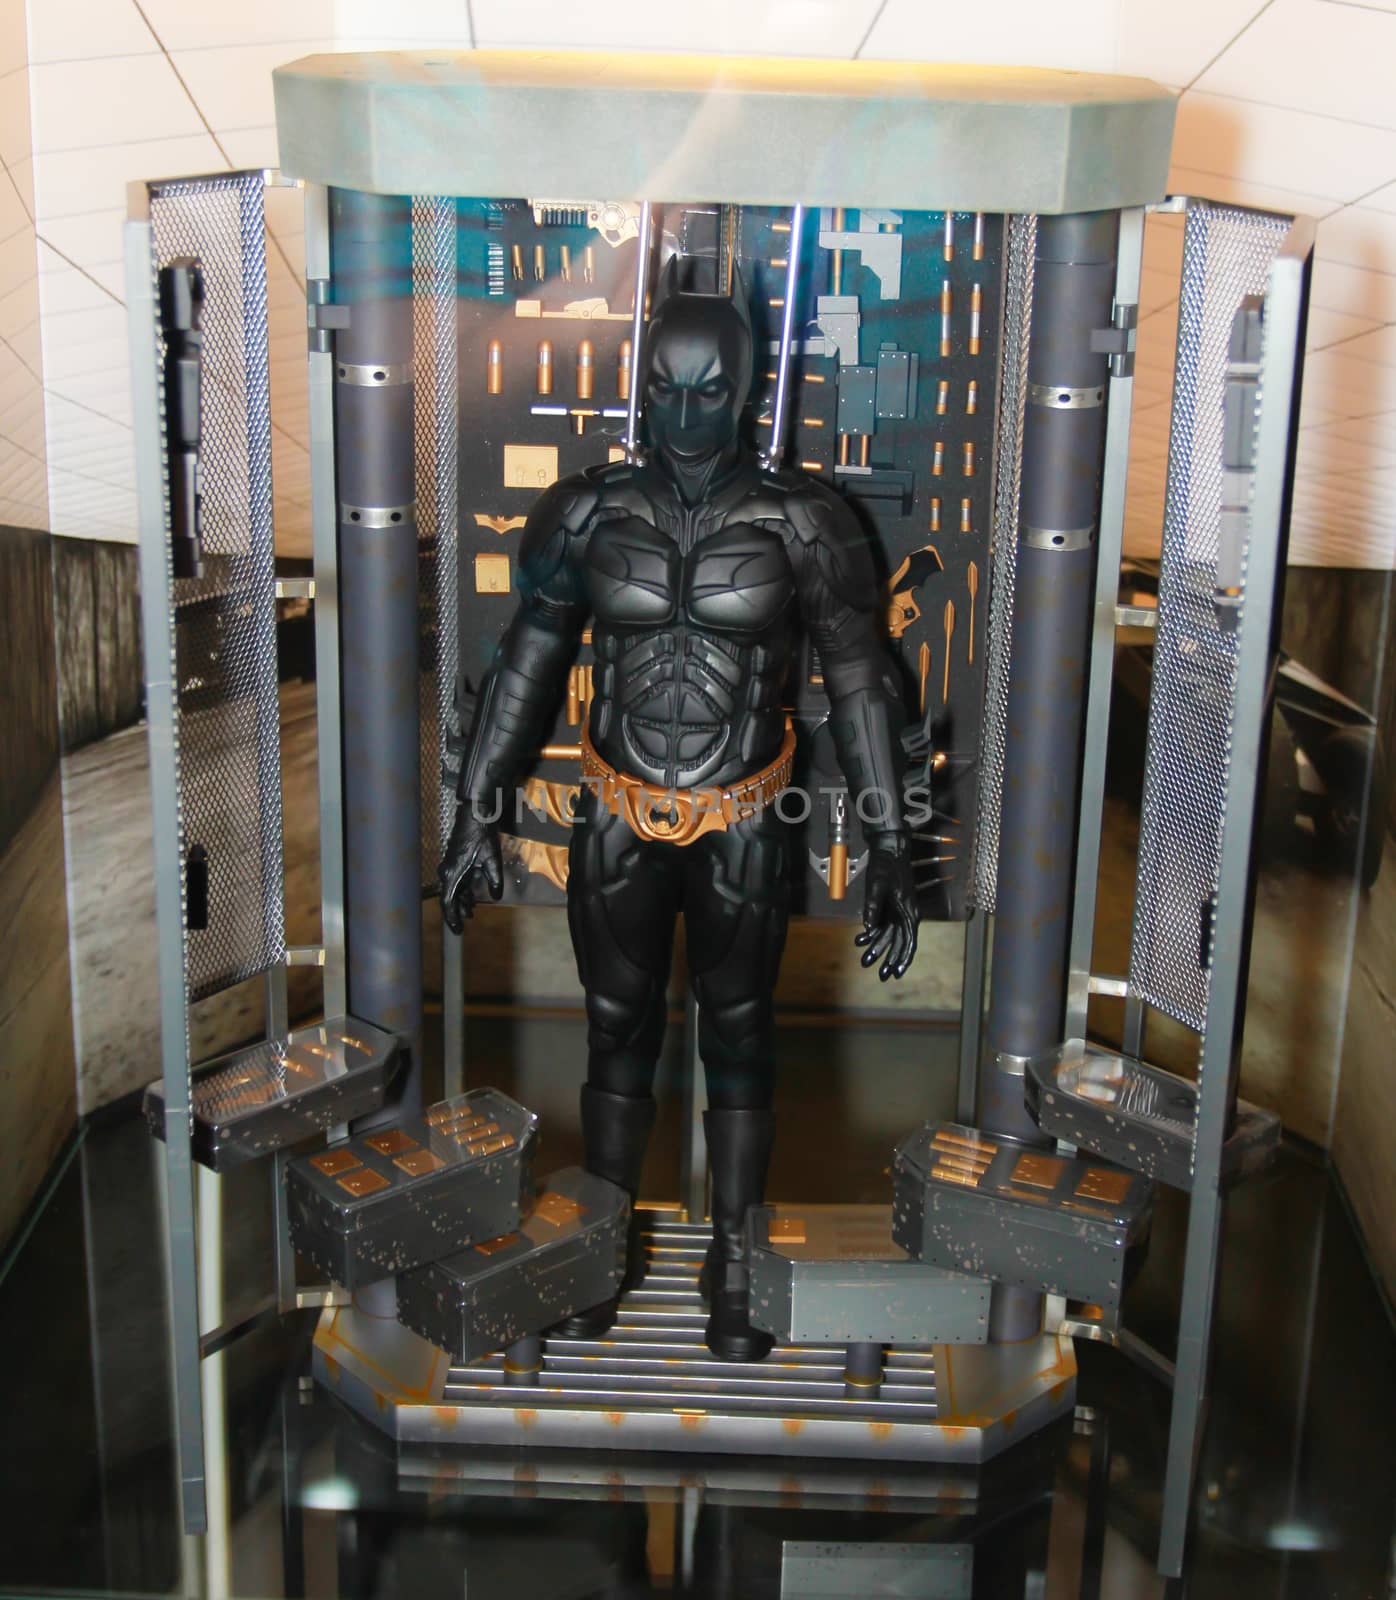 A model of the character Batman from the movies and comics 6 by redthirteen